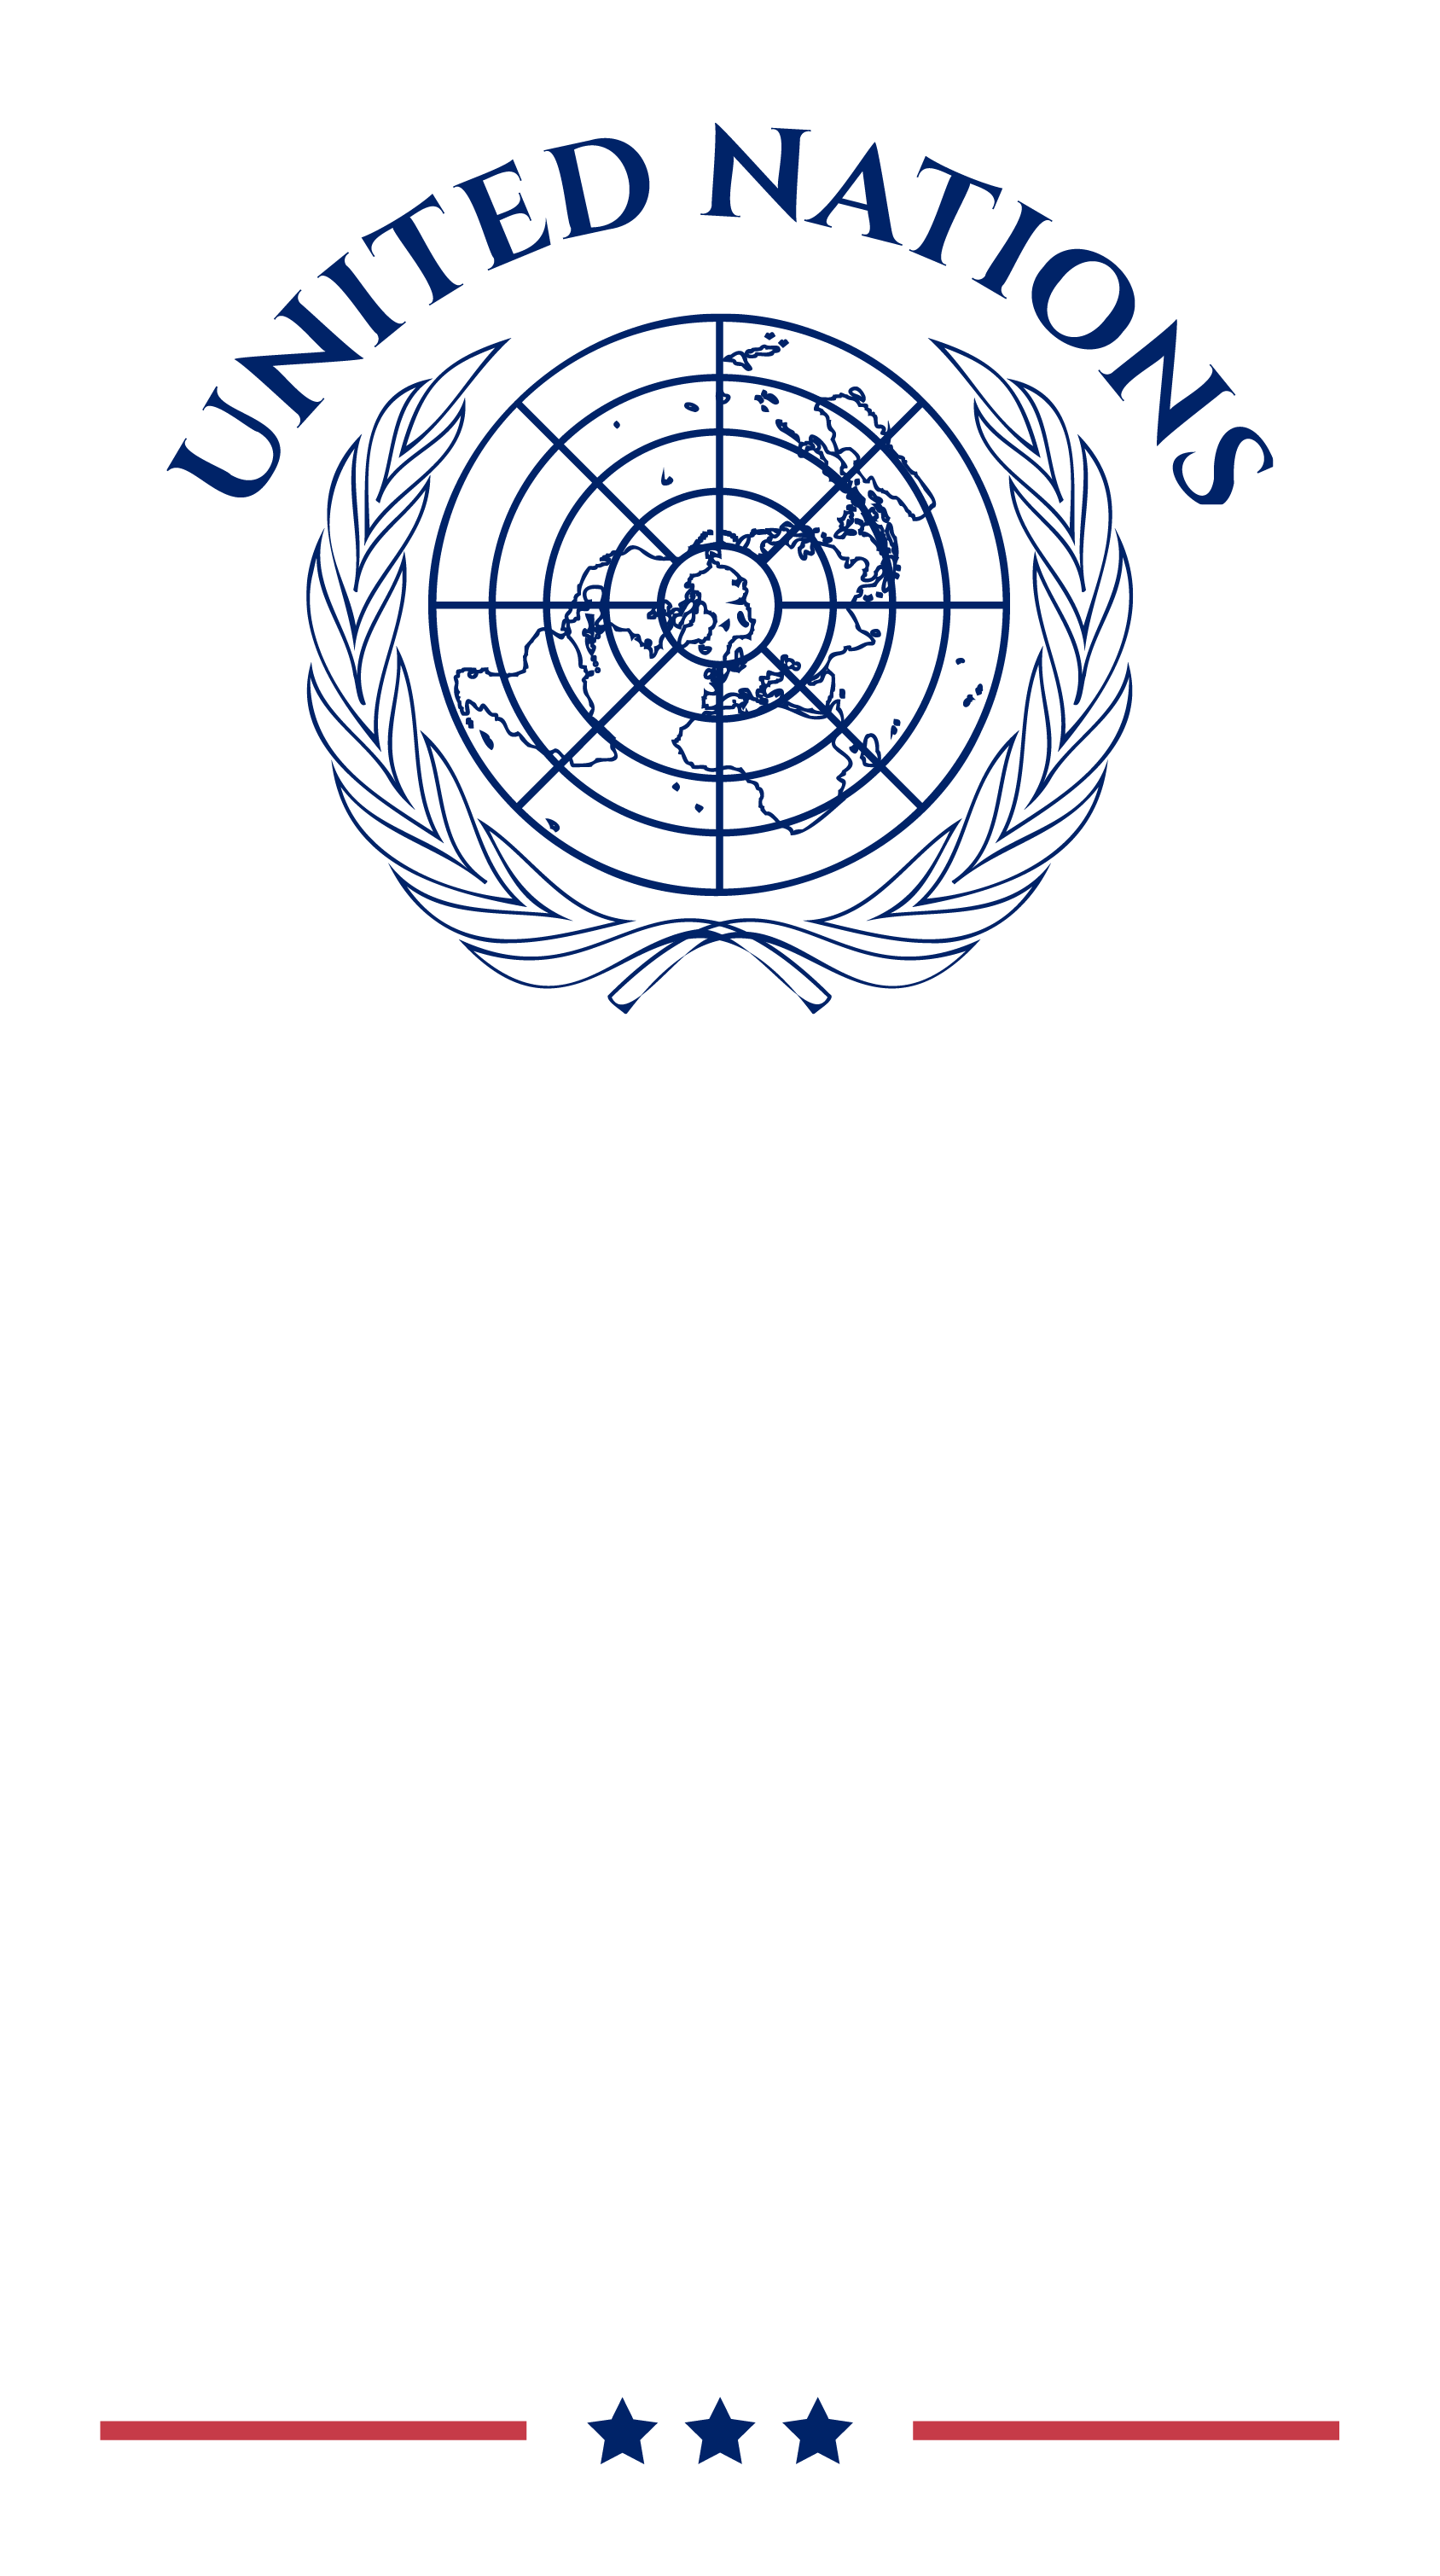 Free United Nations Day iPhone Background in PDF, Illustrator, PSD, EPS, SVG, JPG, PNG